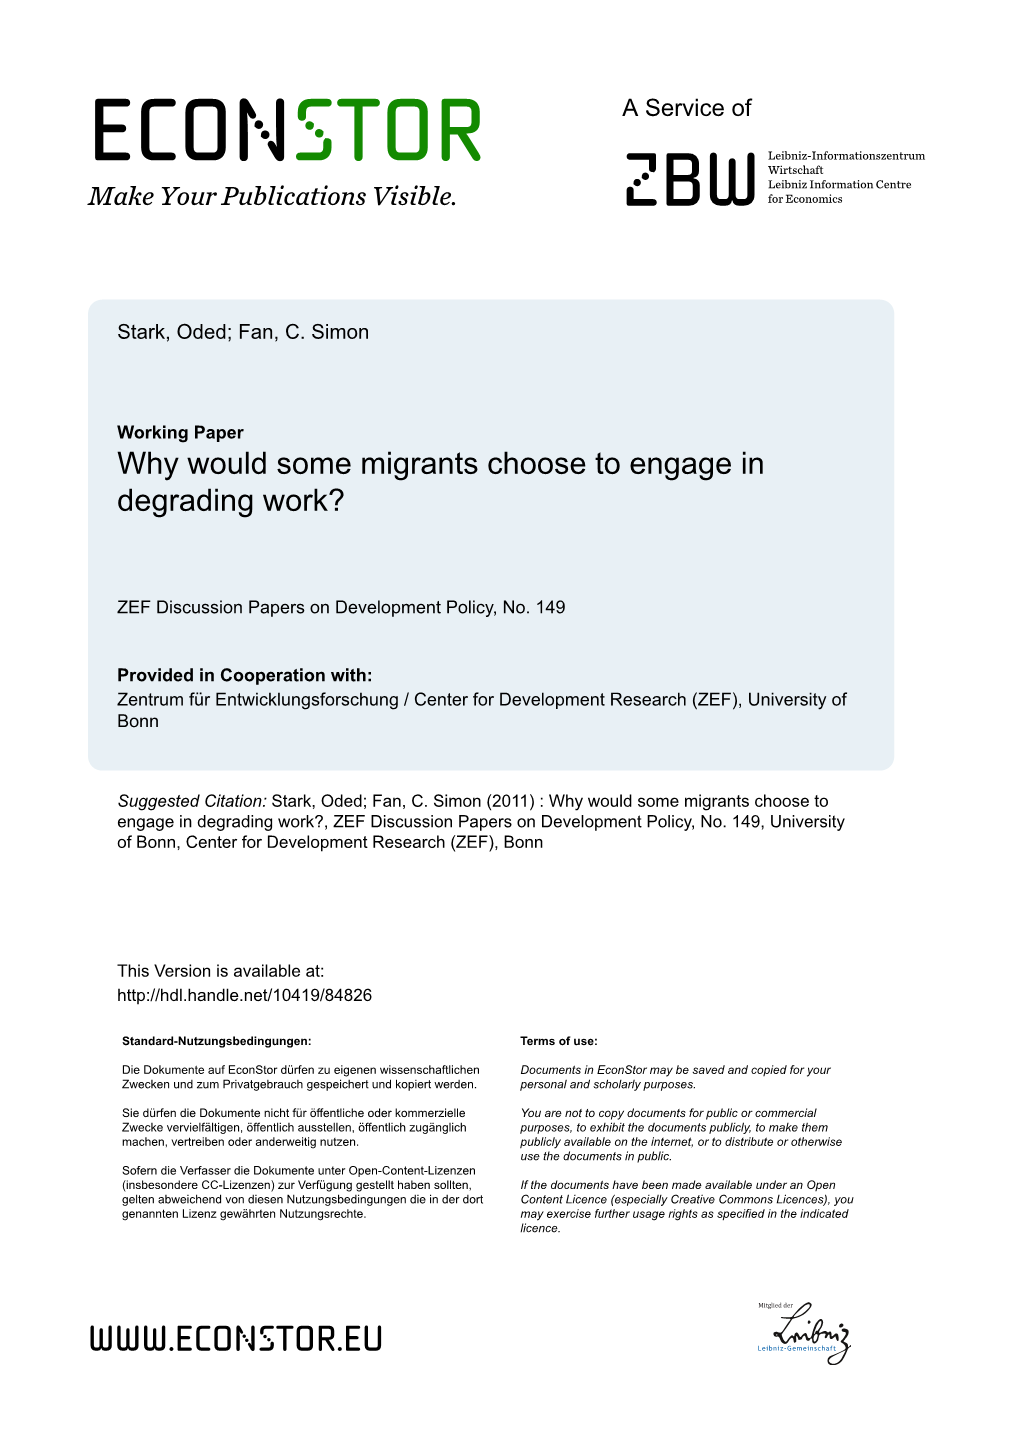 Why Would Some Migrants Choose to Engage in Degrading Work?